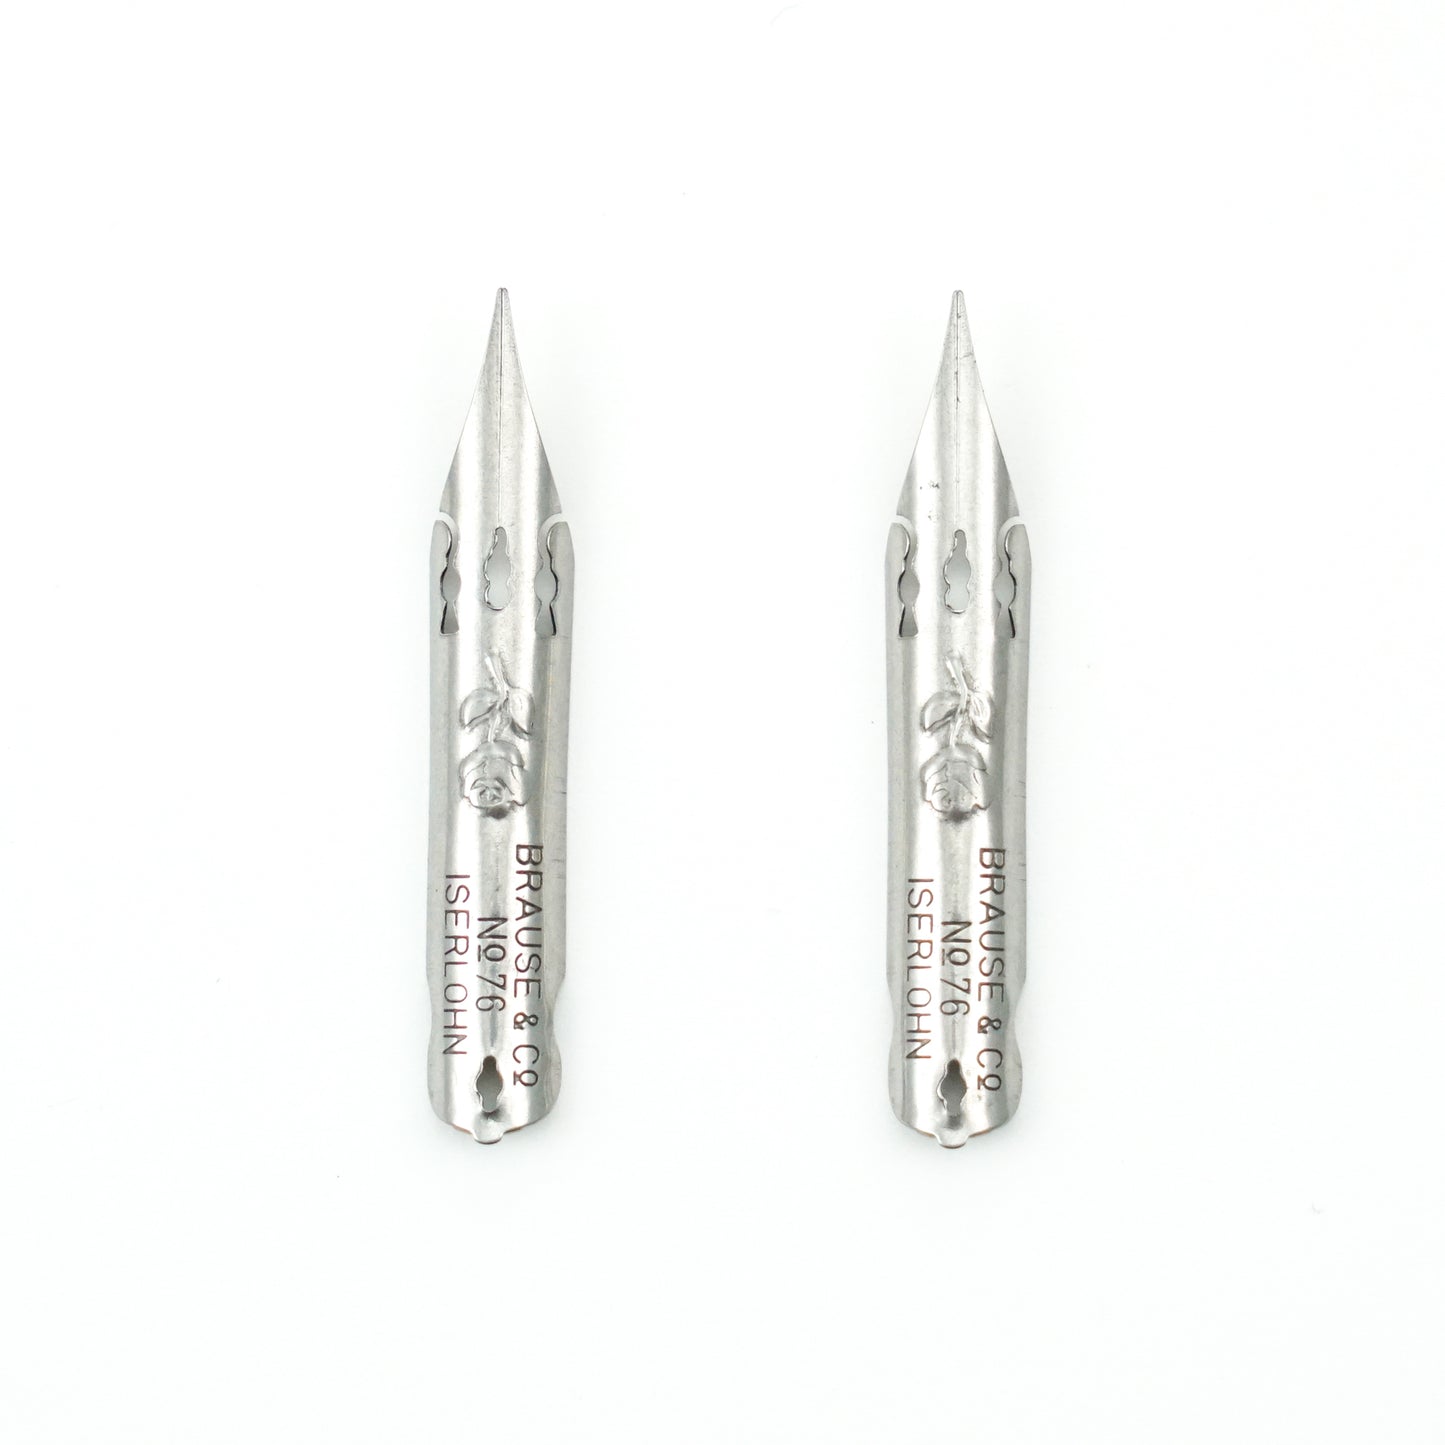 Brause 511 Drawing and Calligraphy Nibs - 2/pack